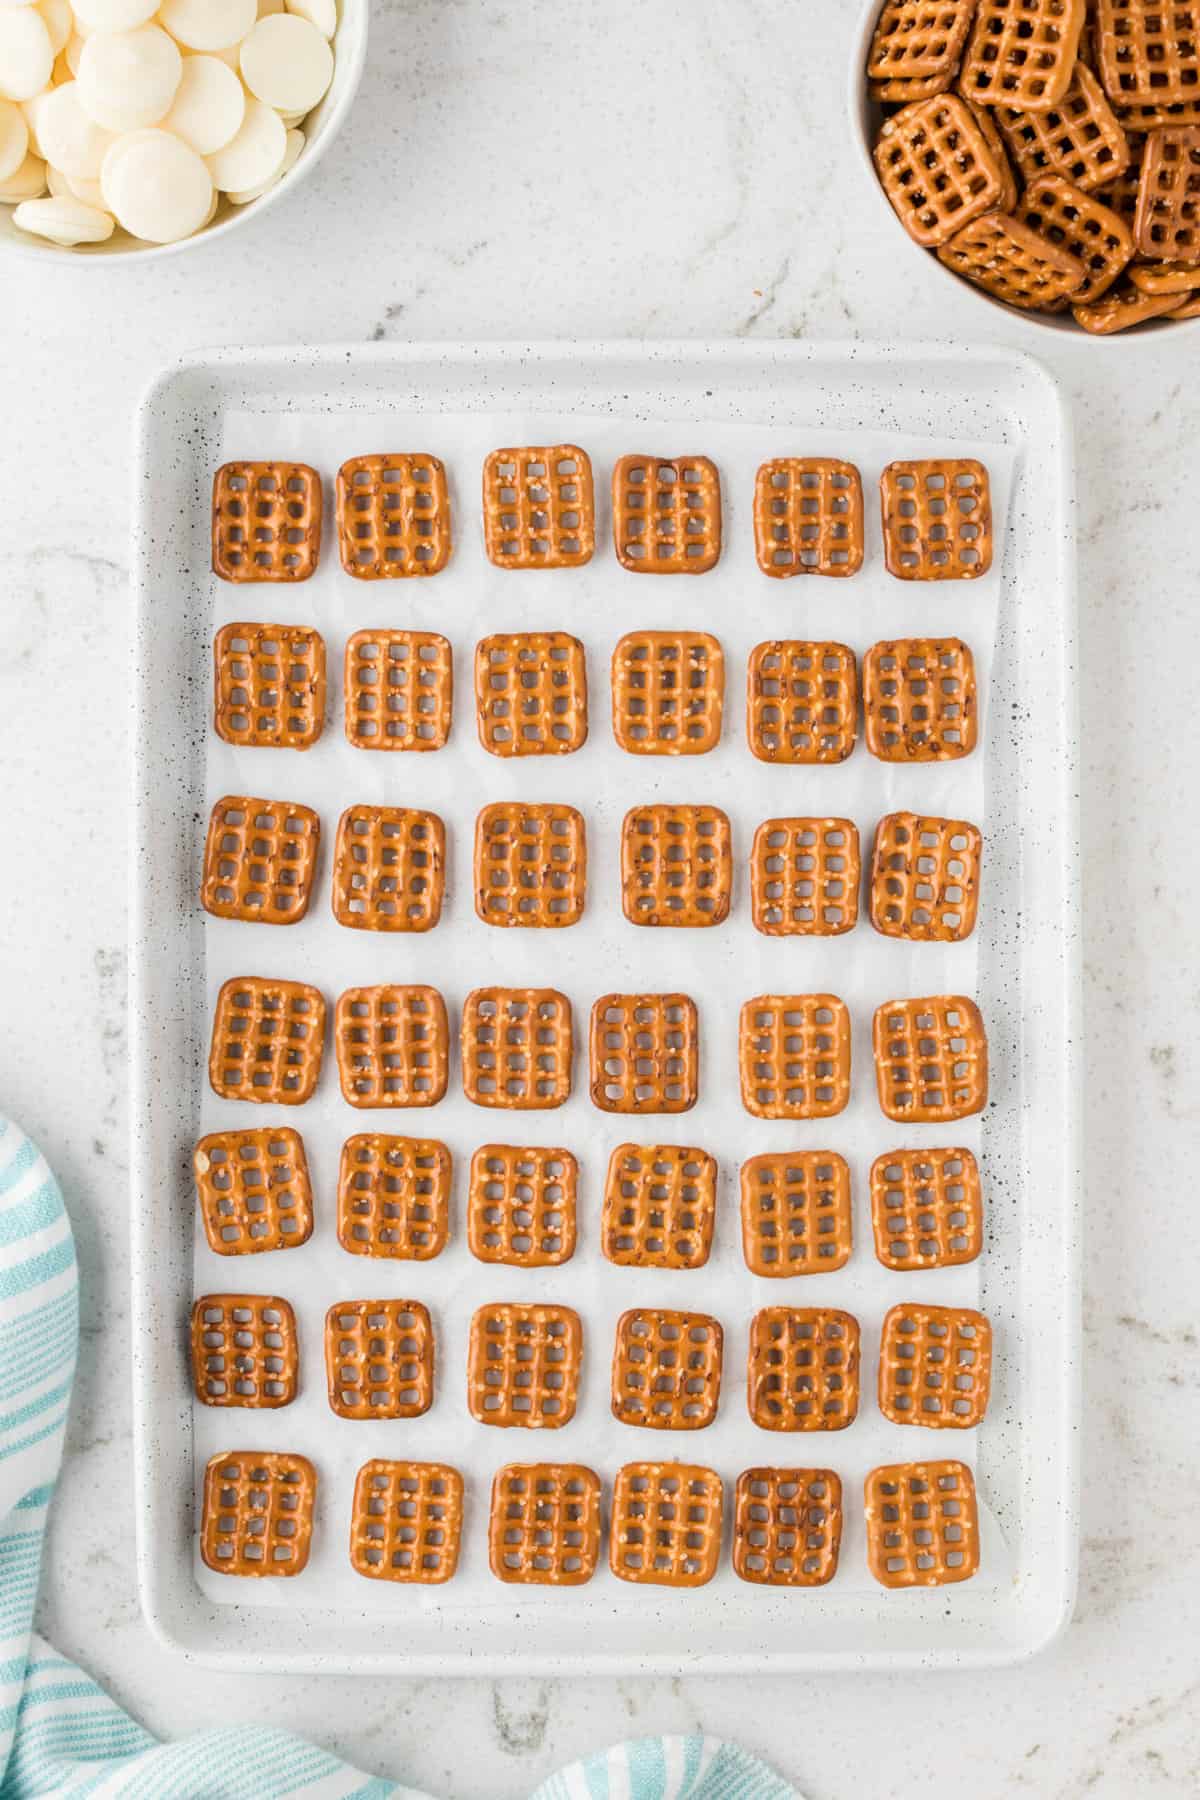 Place the square pretzels evenly separated on the prepared baking sheet.